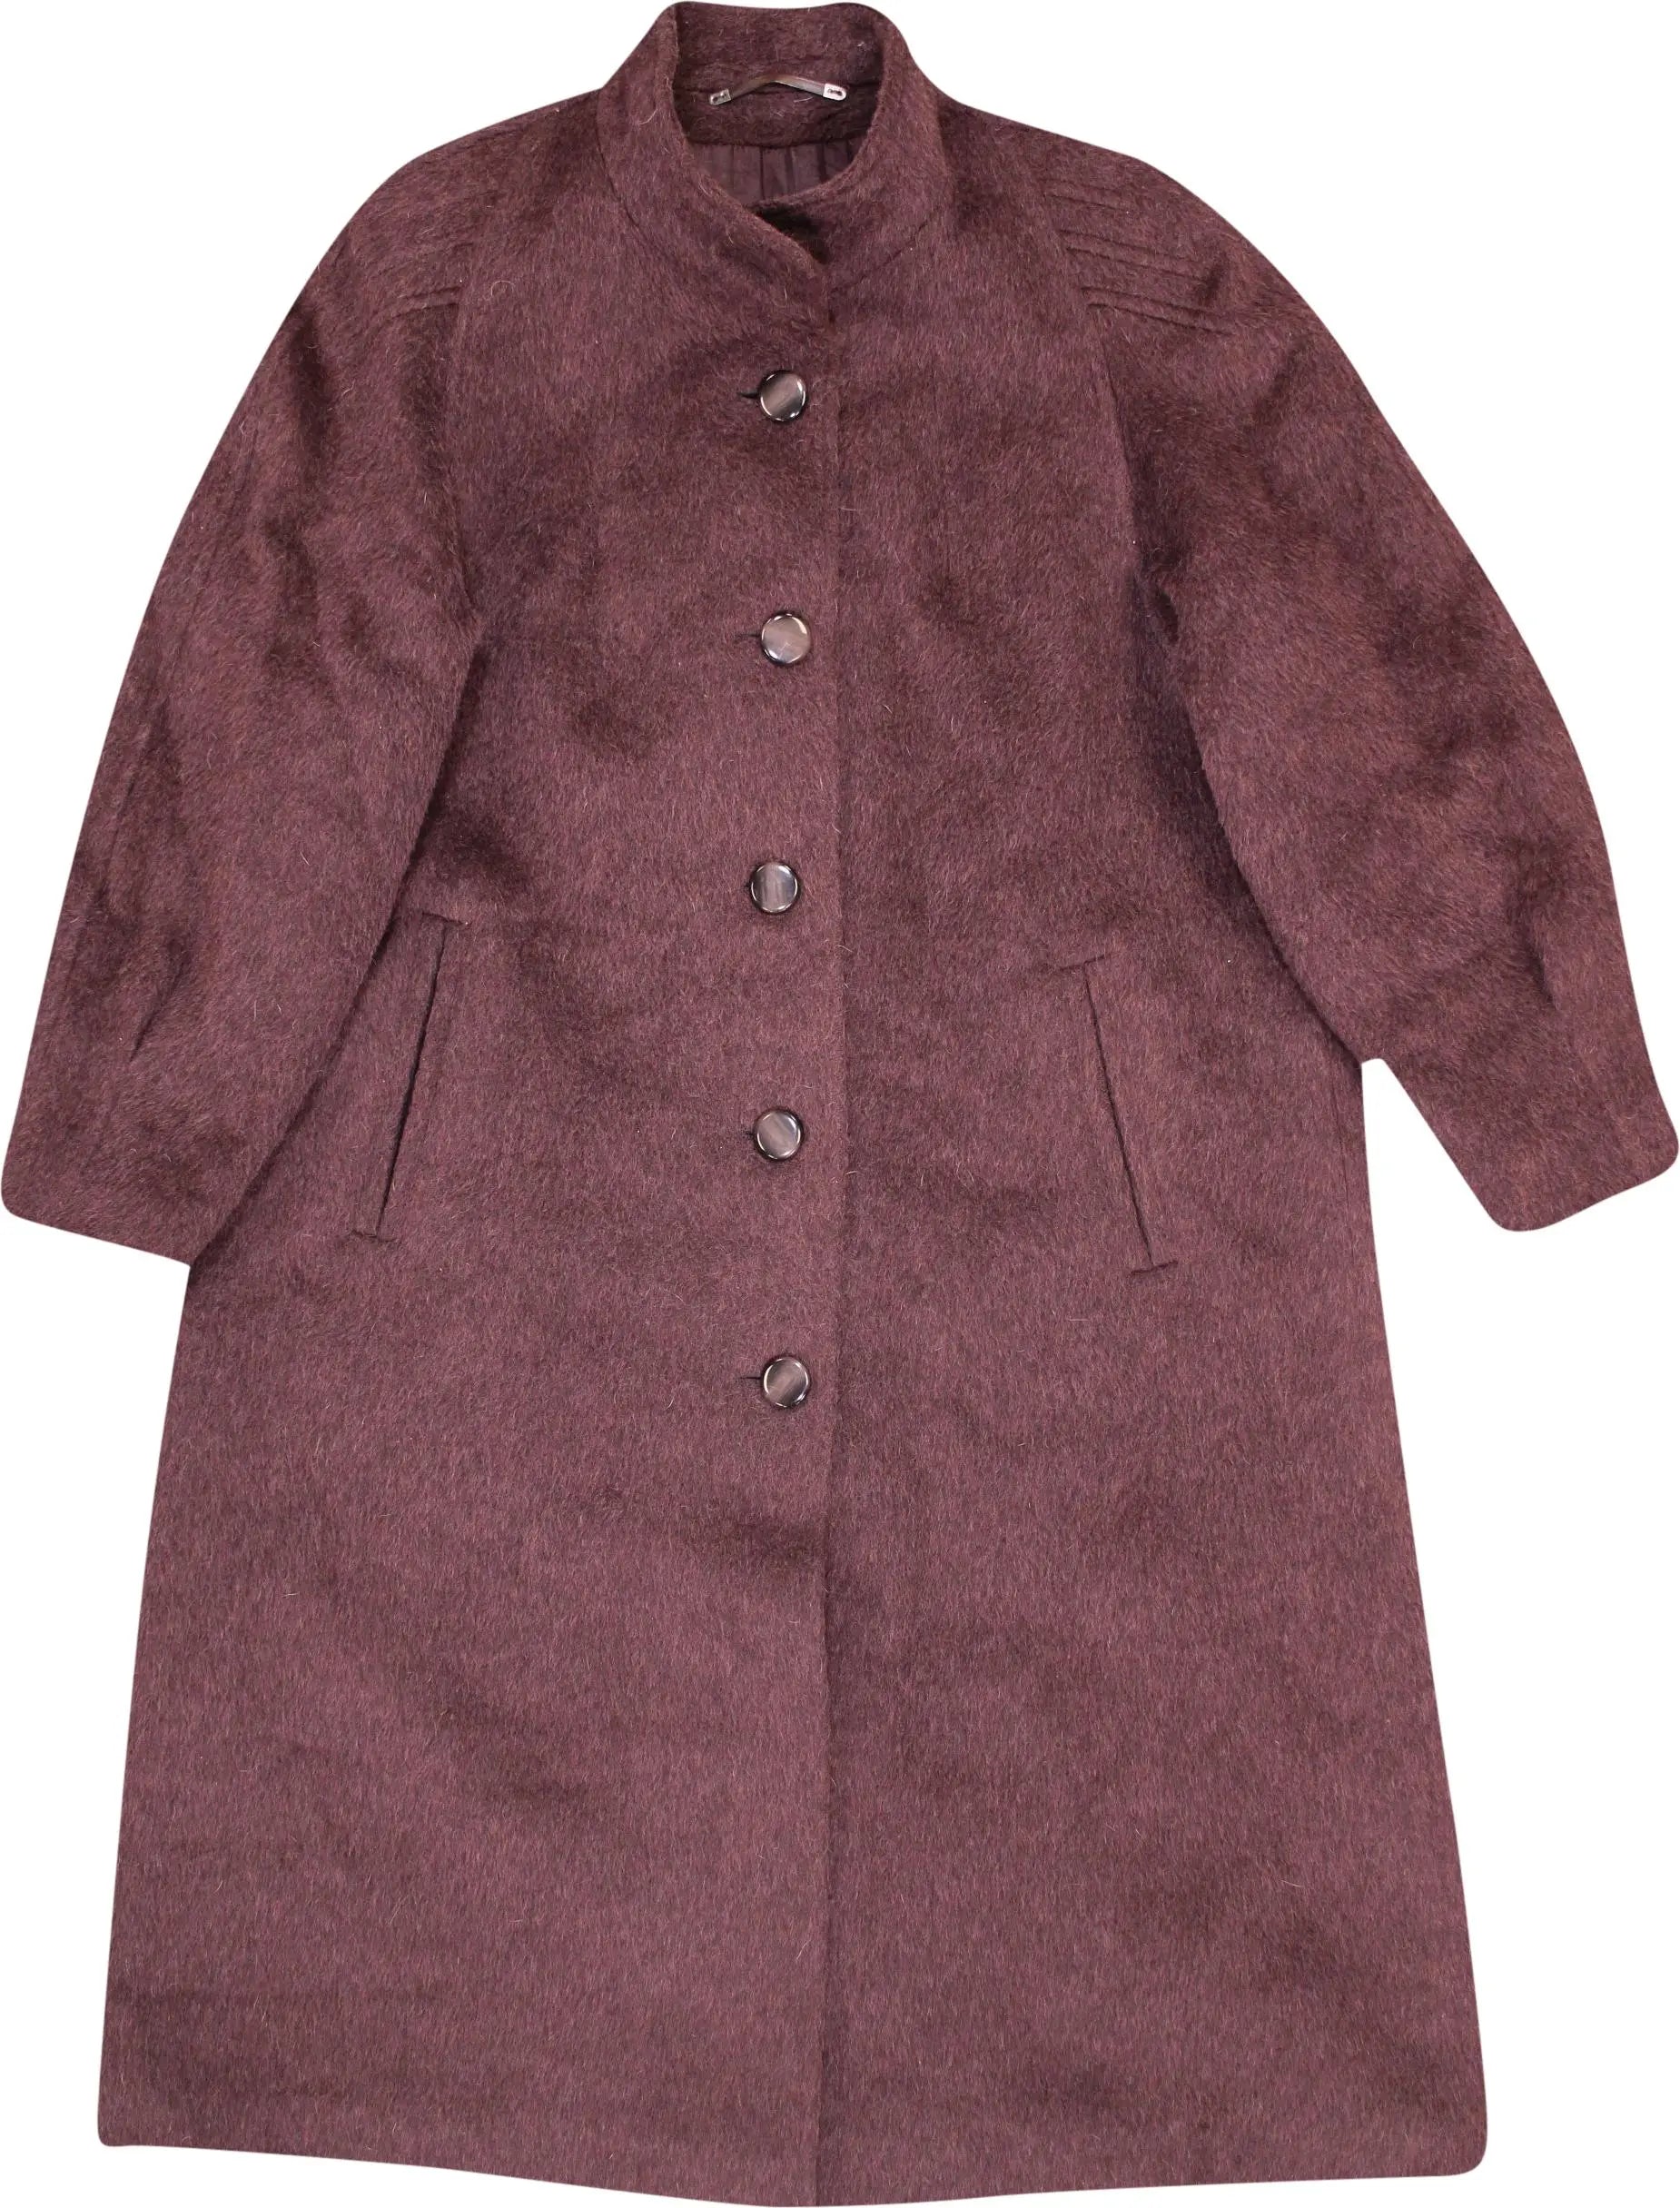 Götz Fashion - Beautiful Coat Made From Lama & Alpaca Wool- ThriftTale.com - Vintage and second handclothing